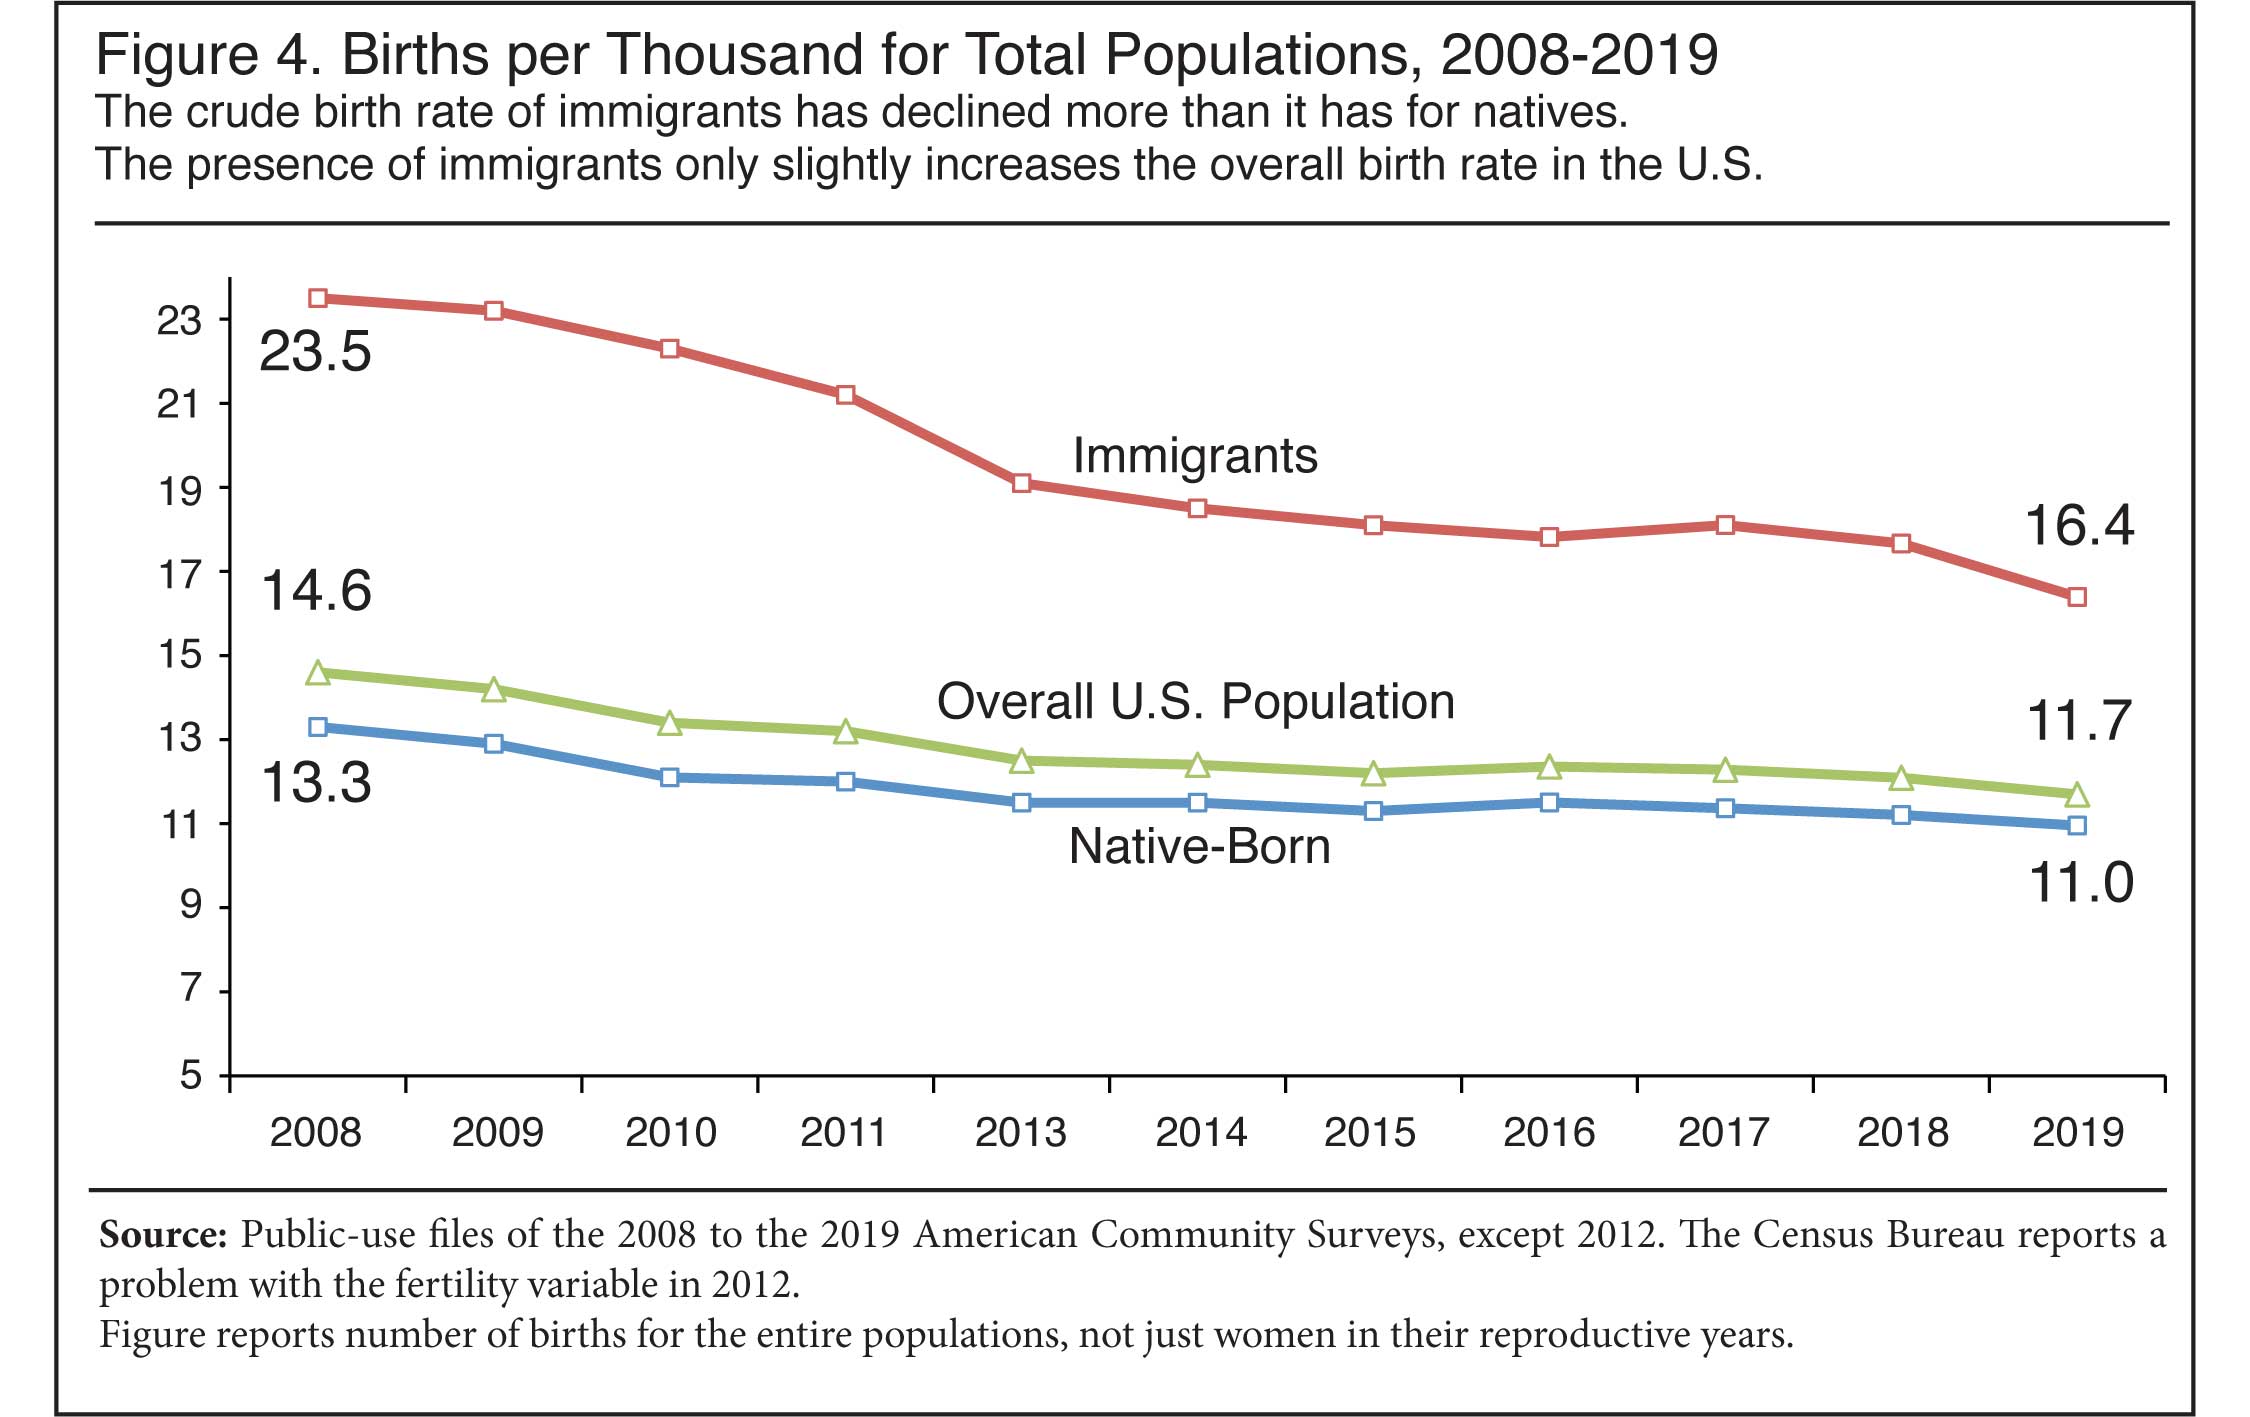 Graph: Births per Thousand for Total Populations, 2008 to 2019